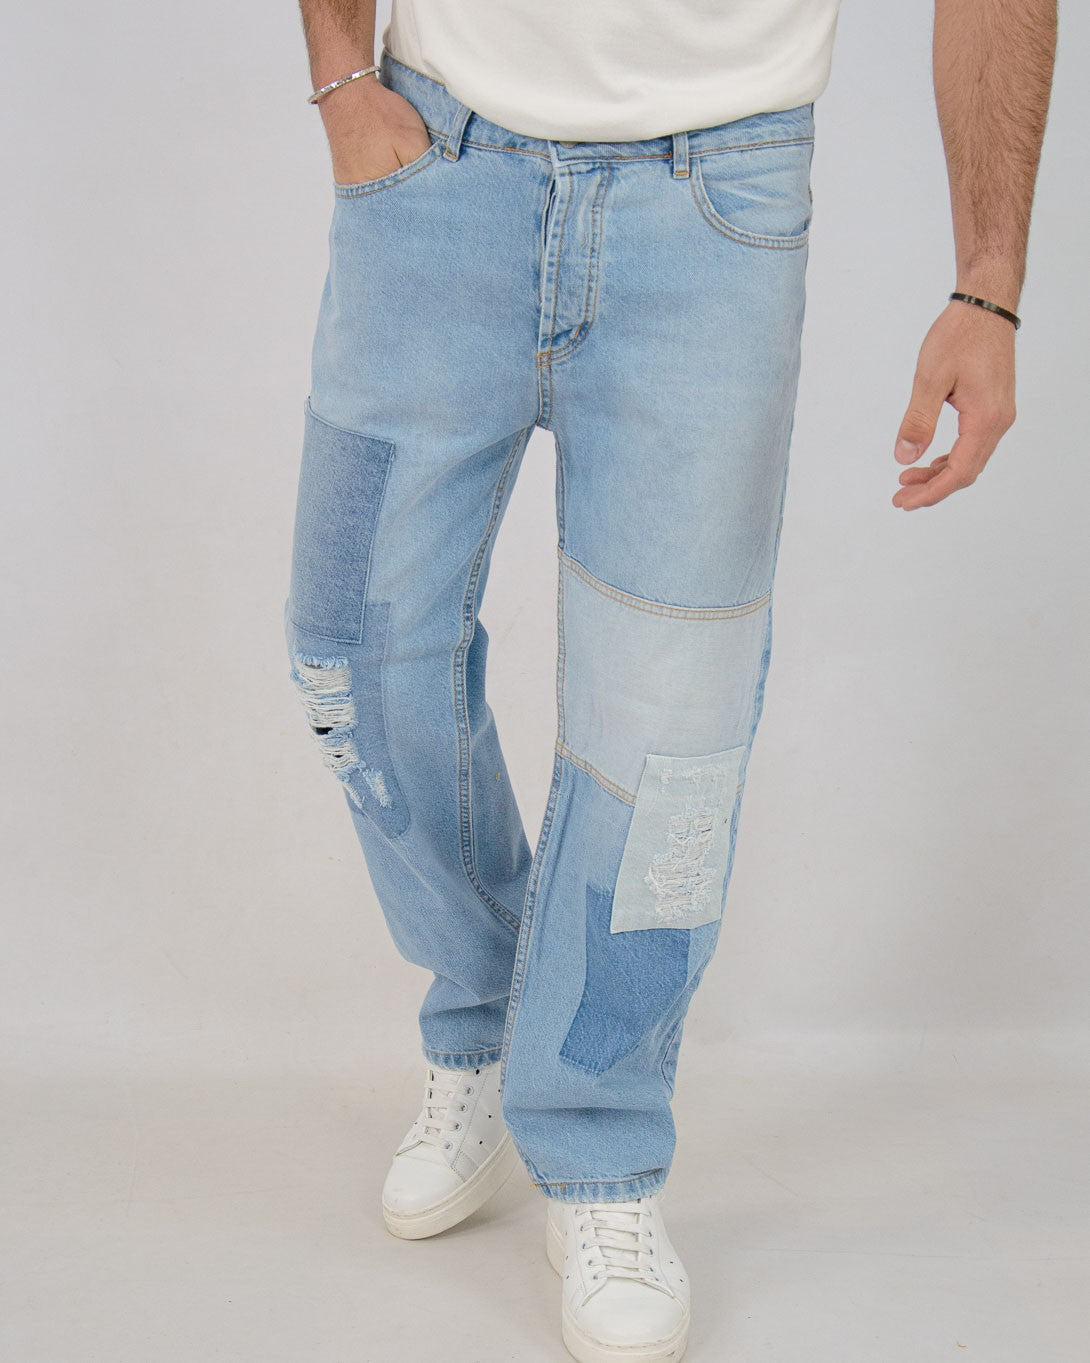 jeans uomo street con toppe wide fit